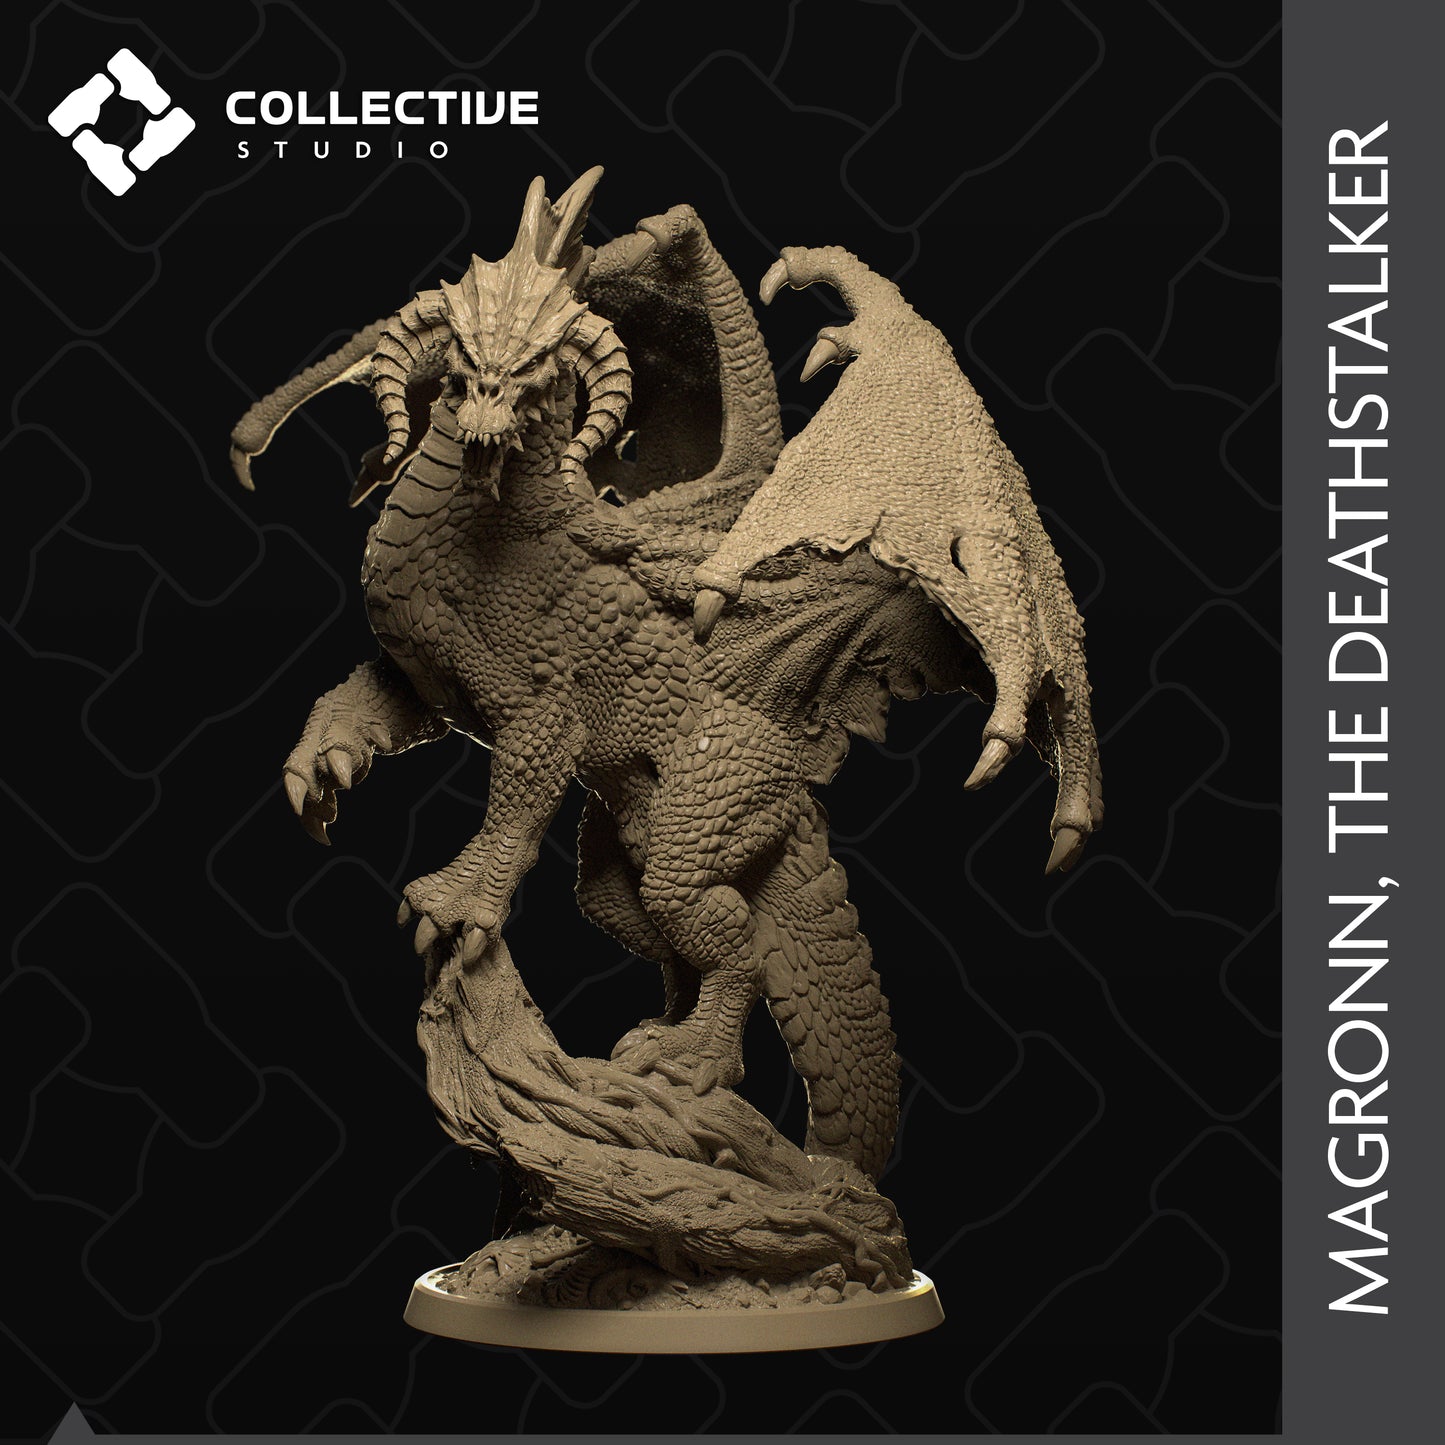 Magronn The Deathstalker - Drache Boss Miniatur | Dungeons and Dragons | Tabletop | D&D | Collective Studio